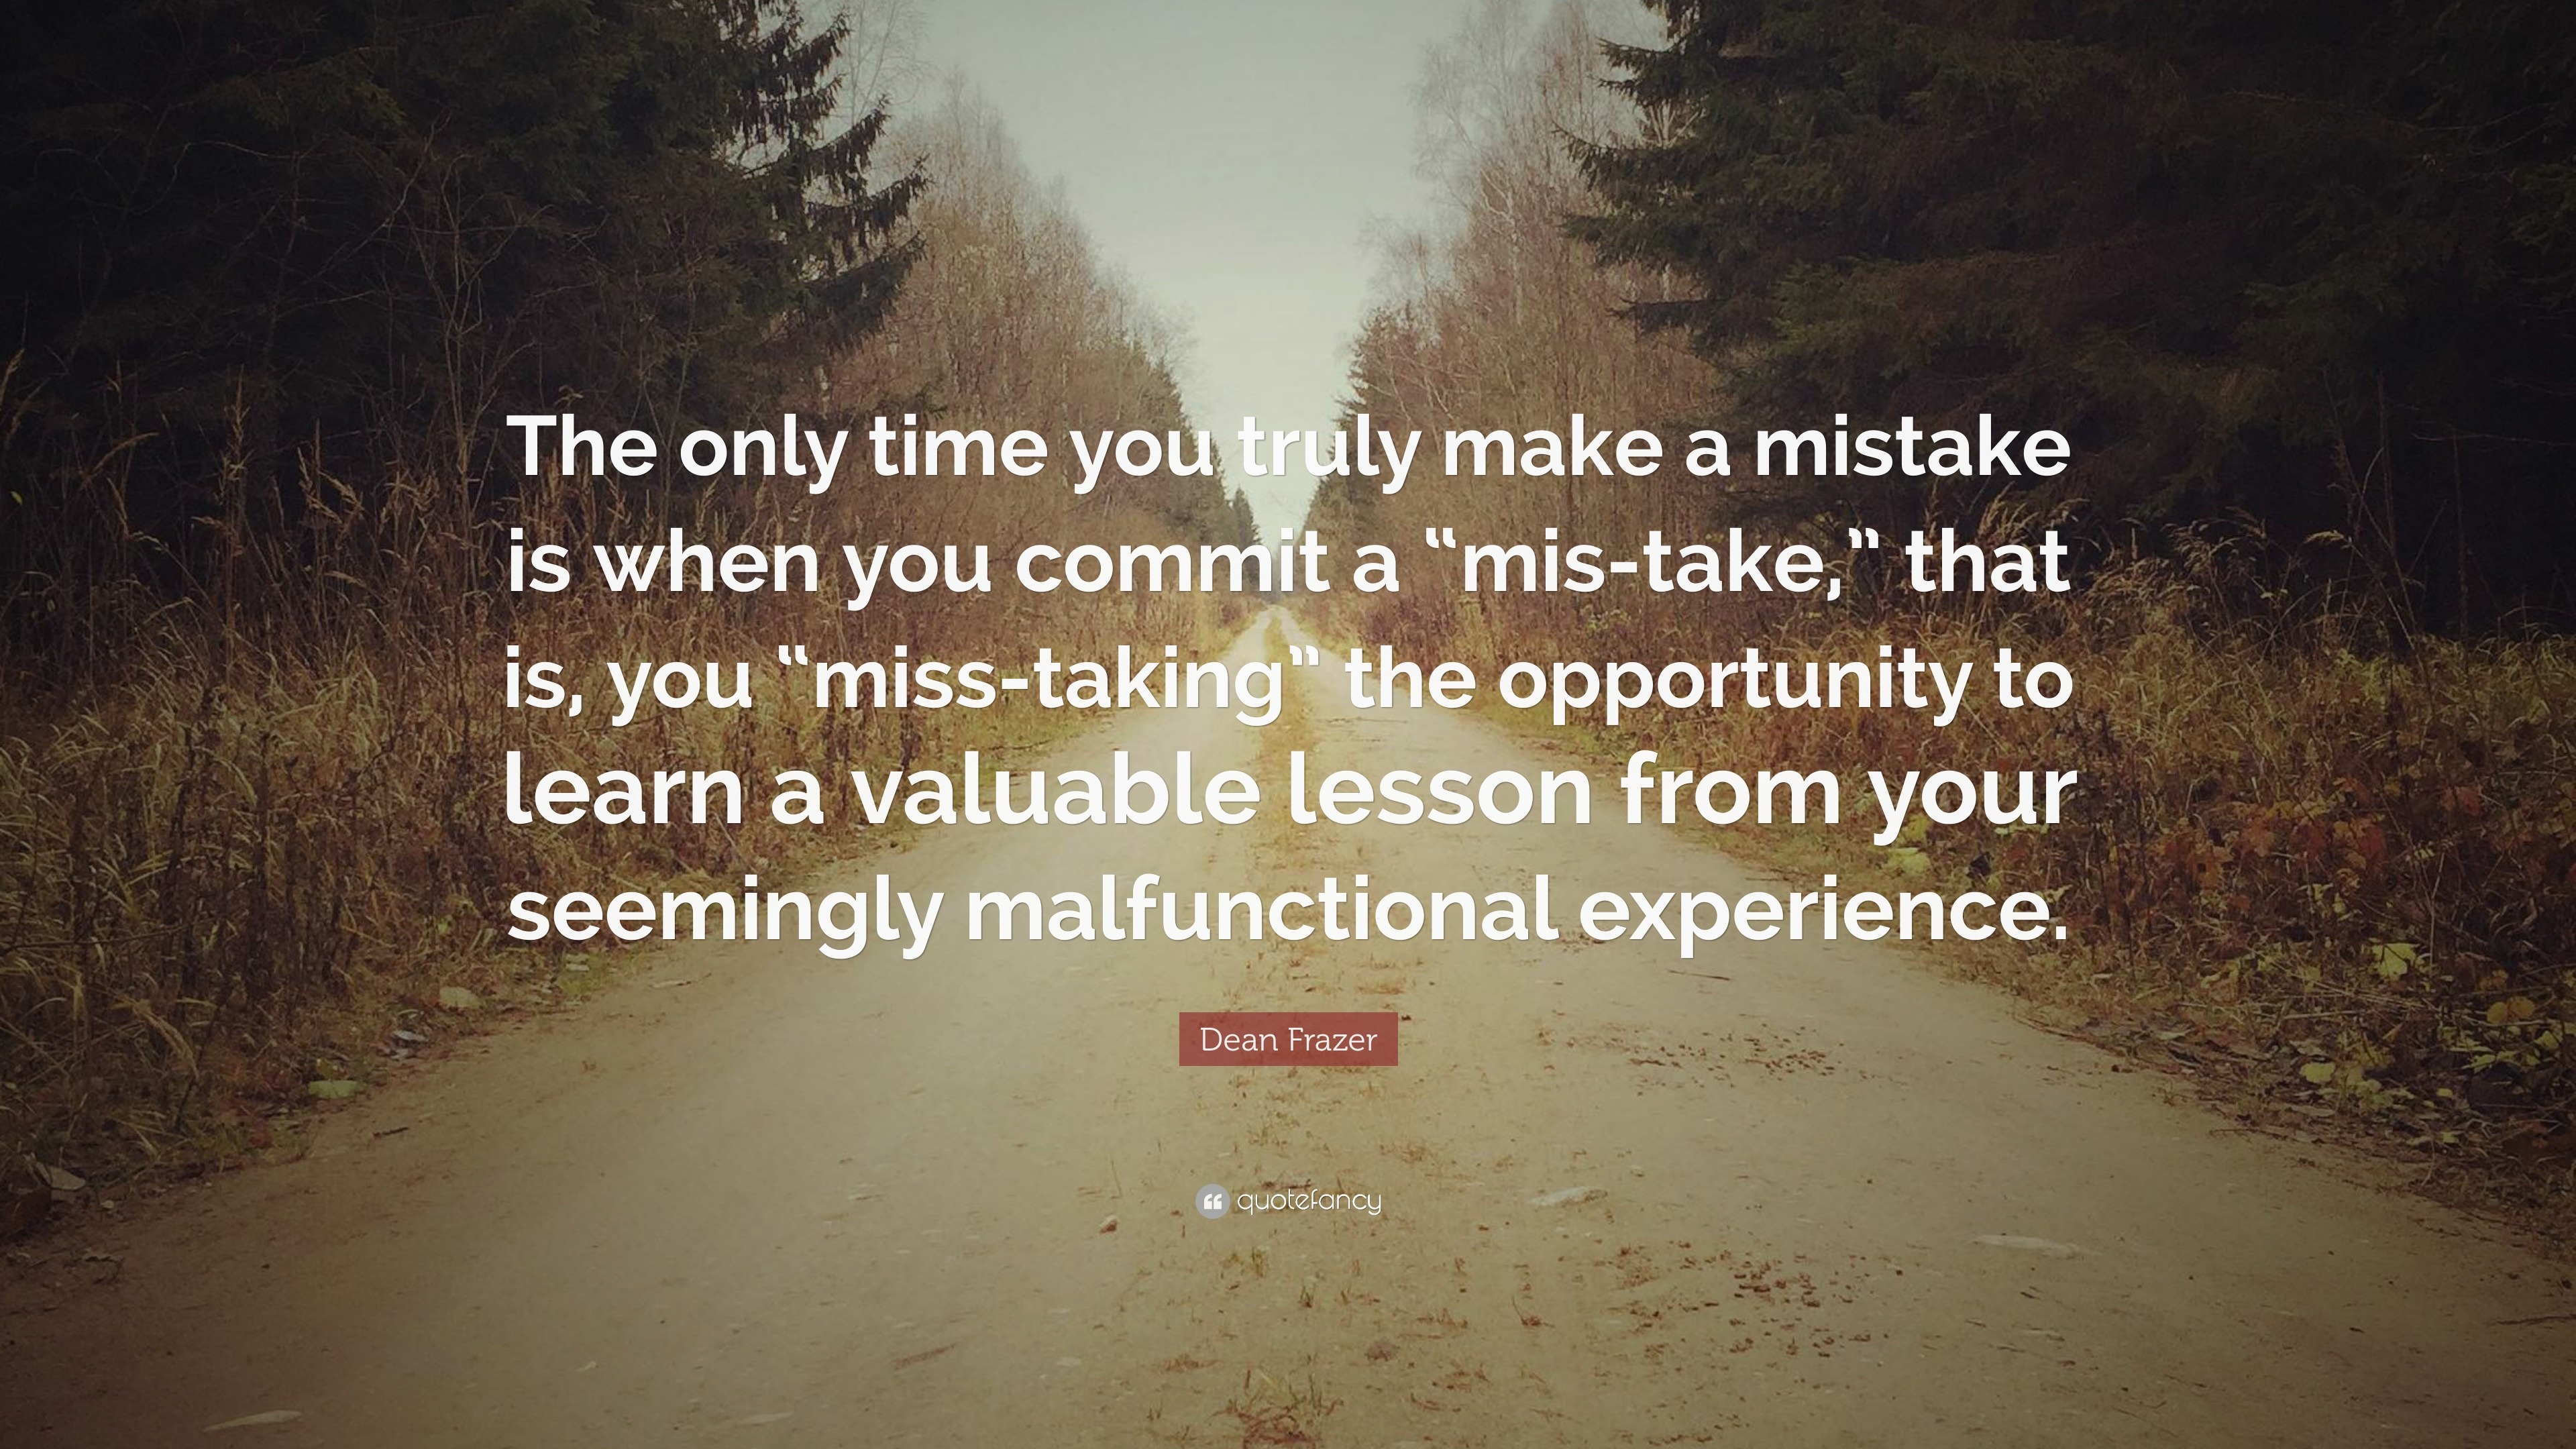 Dean Frazer Quote: “The only time you truly make a mistake is when you ...